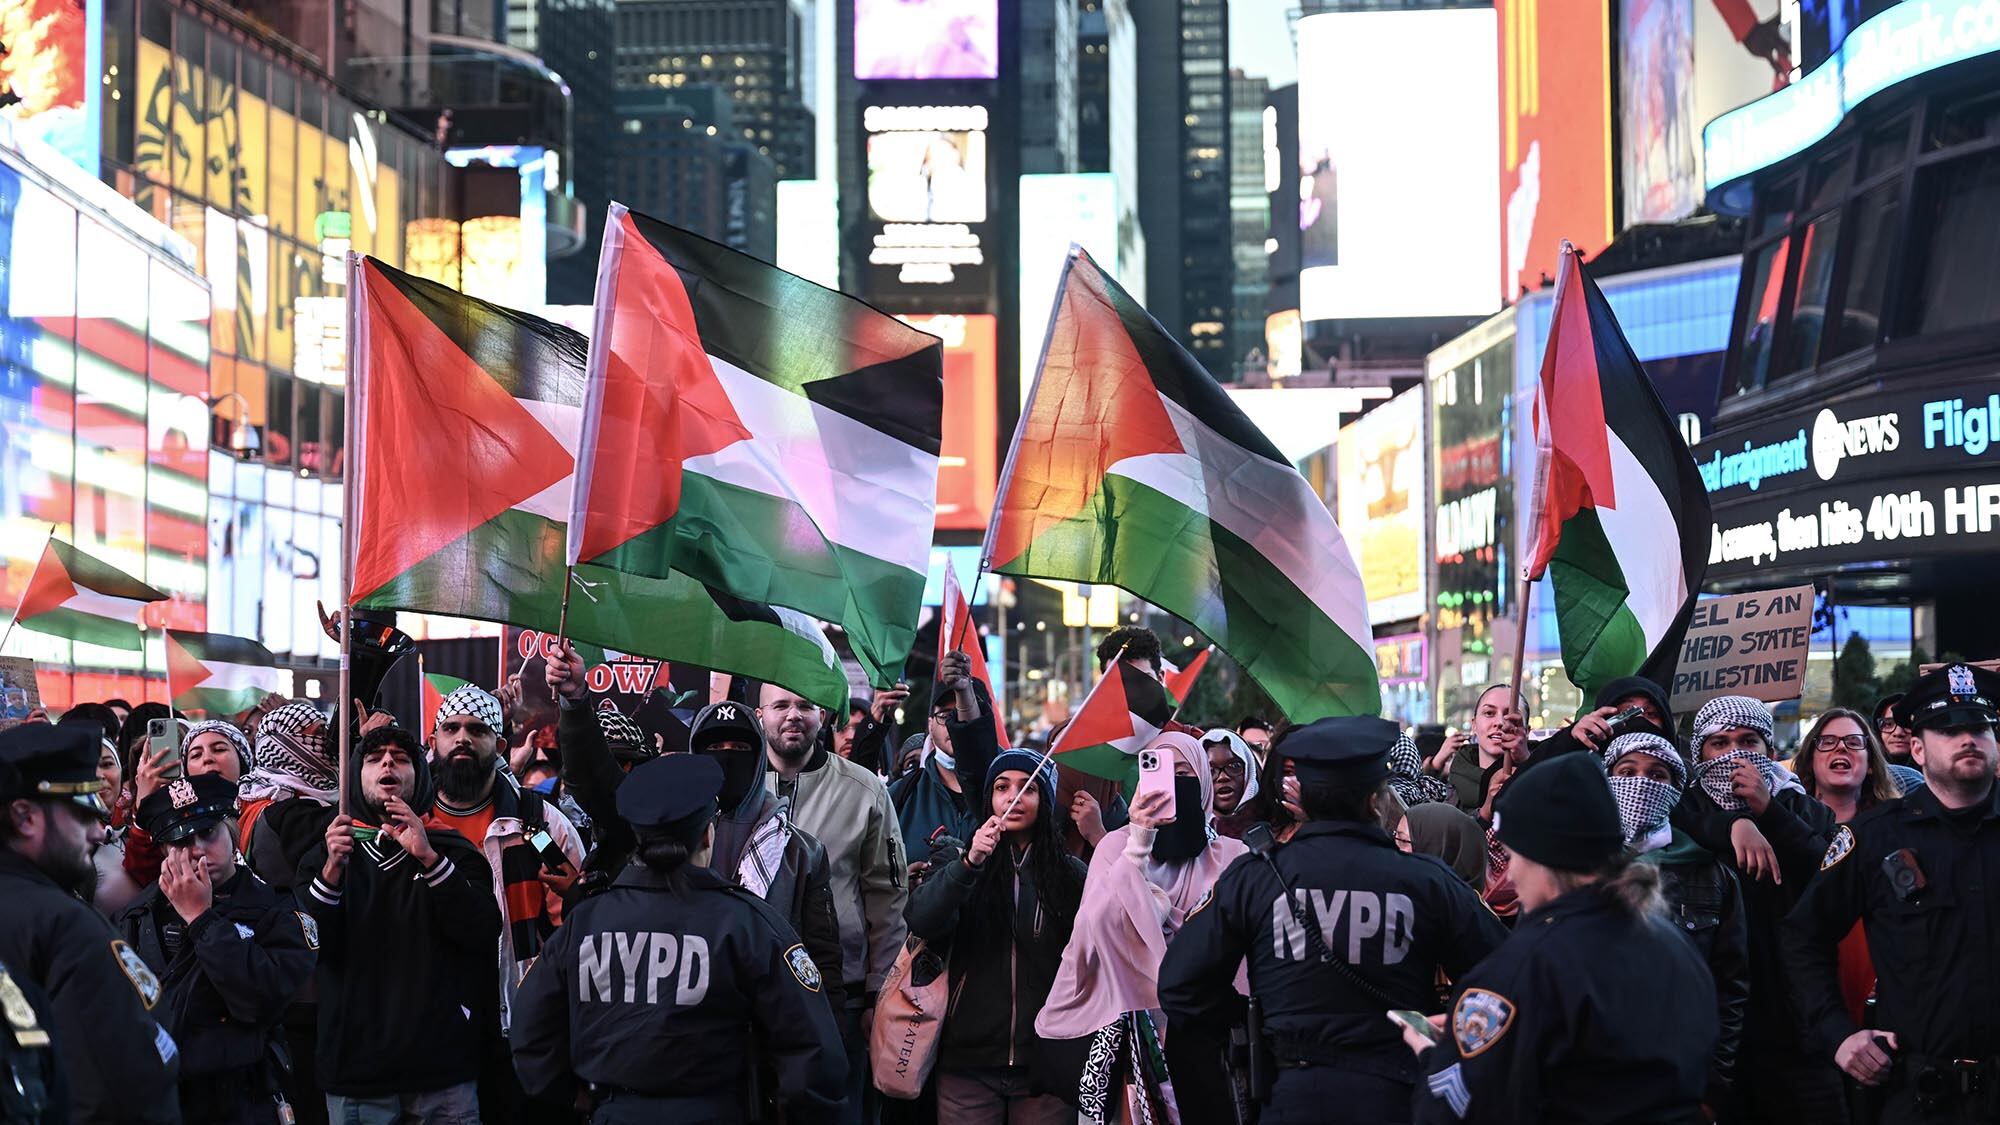 Protestors march with Palestinian flags in New York City.